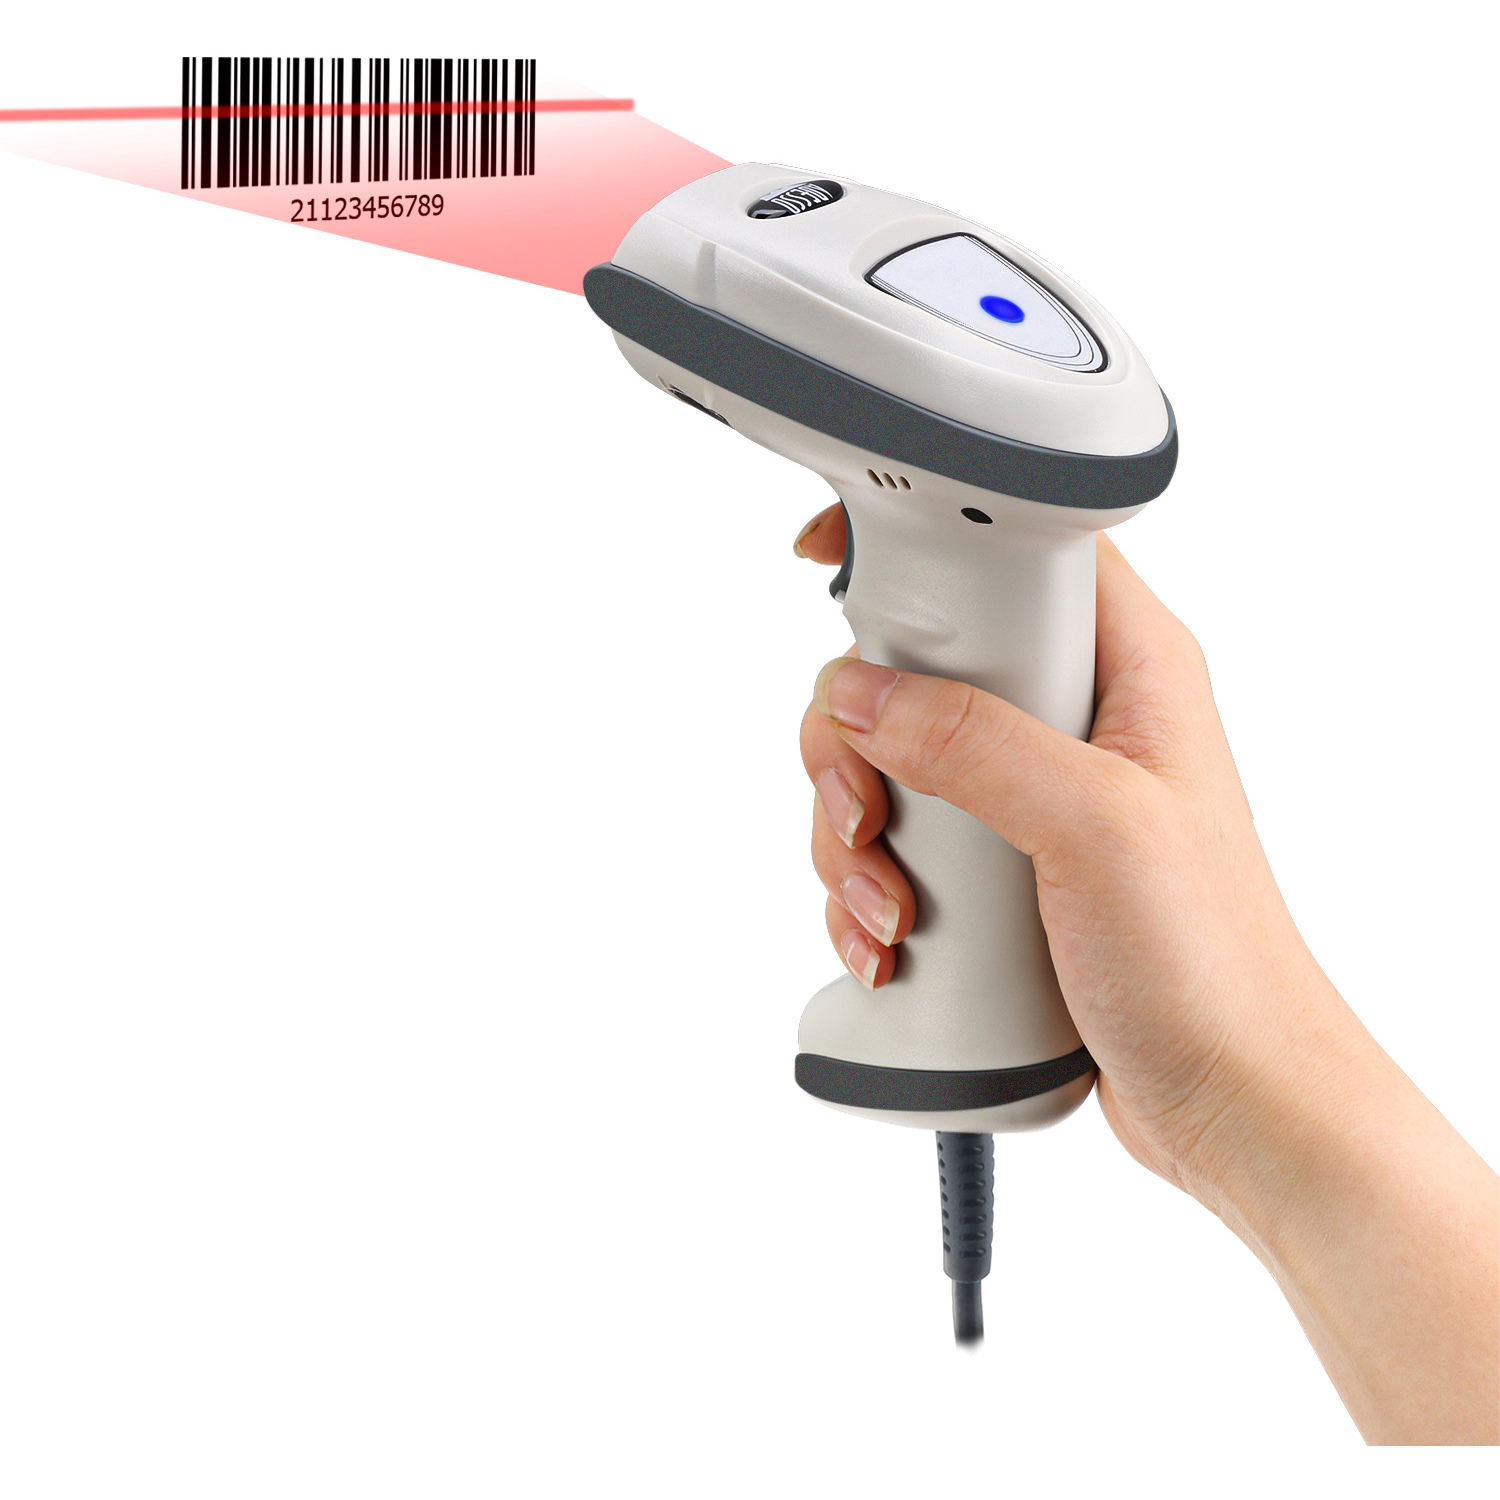 Adesso NuScan 7600TU-W 2D Antimicrobial Handheld Barcode Scanner - White - image 5 of 5